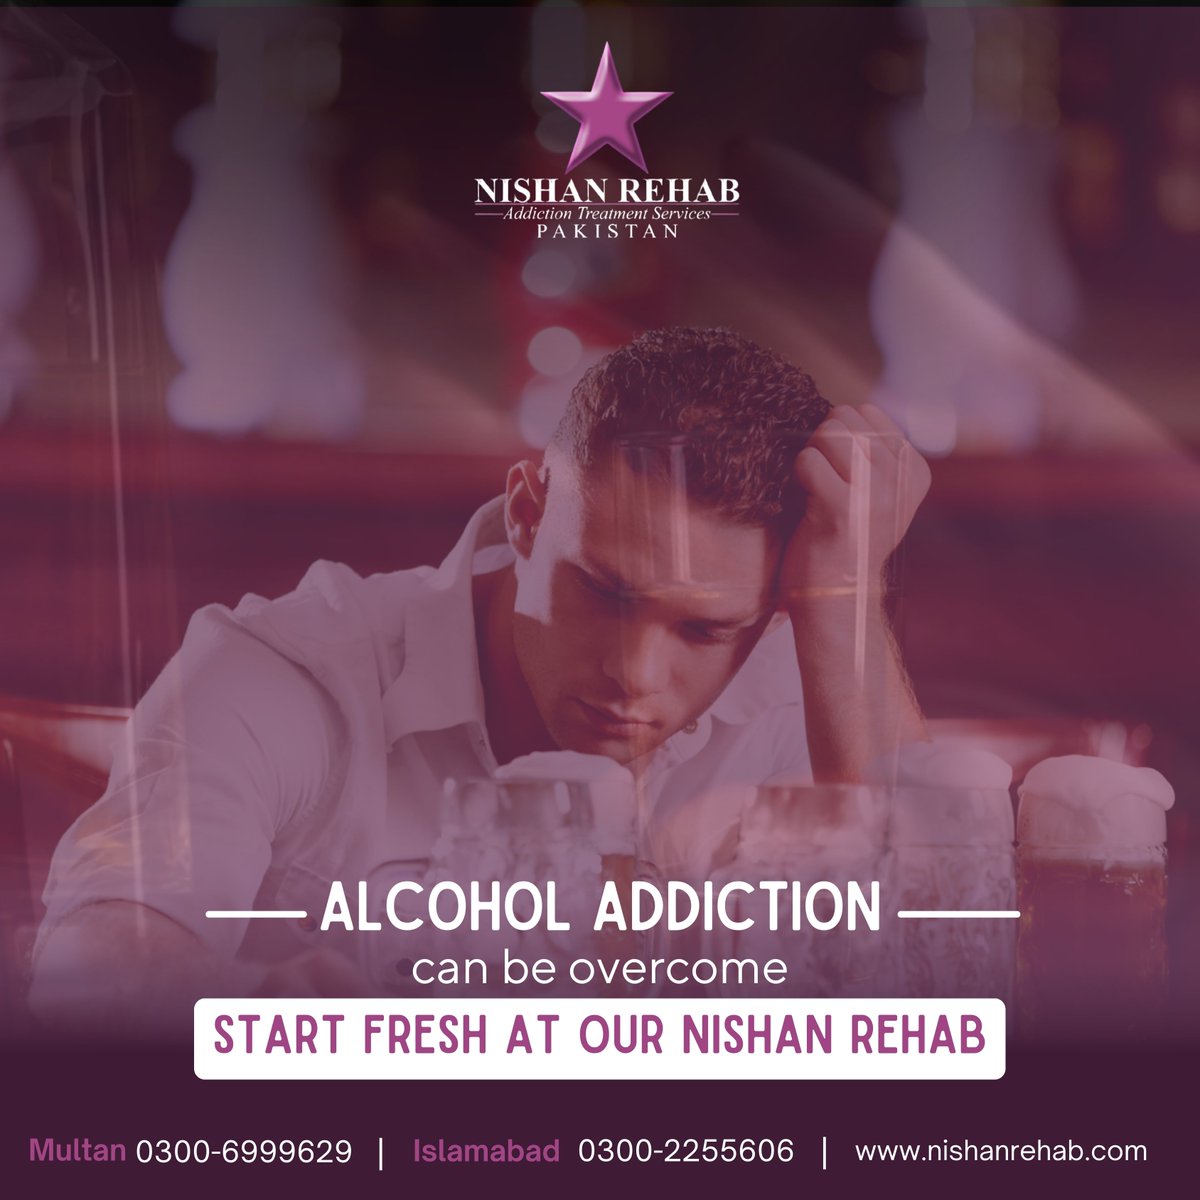 Embark on a journey to overcome alcohol addiction and start anew at Nishan Rehab. ✨
Our dedicated team provides personalized care and support💙

#journey #addictionrecovery #recoveryispossible #NishanRehab #prioritize #discover #recovery